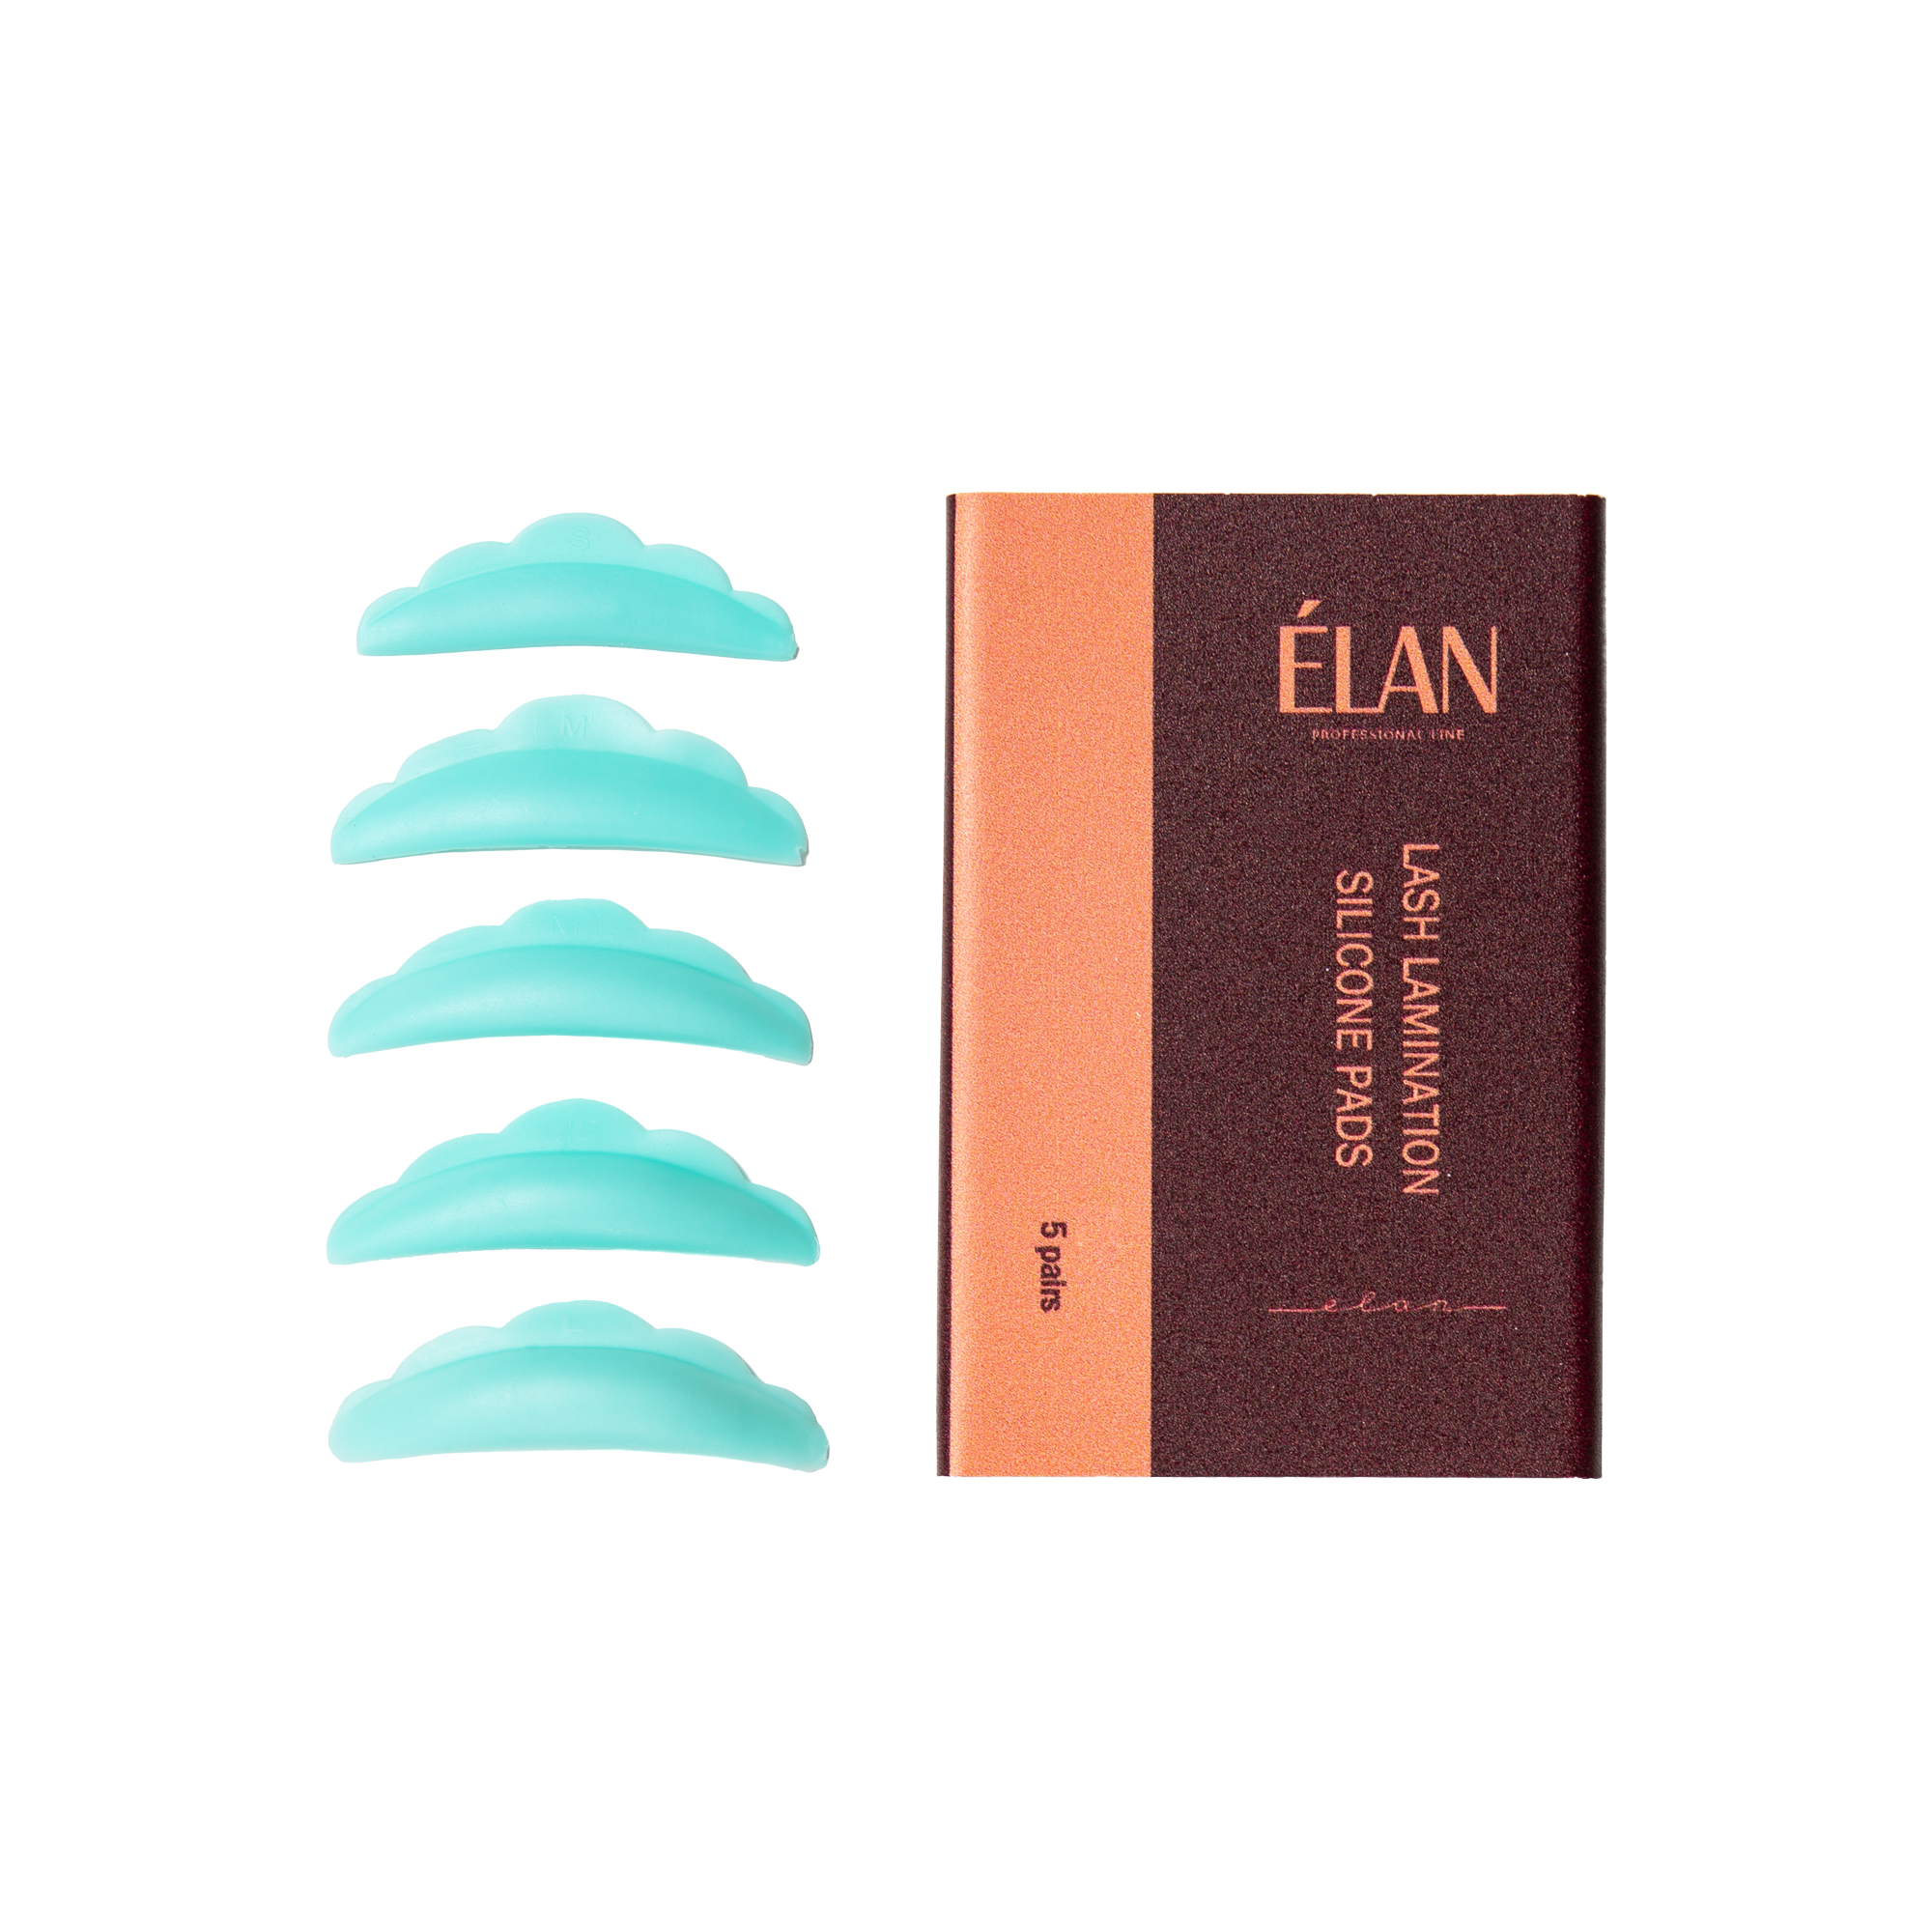 ÉLAN - Silicone Pads for lash lifts - (Size M1, 5 pairs)